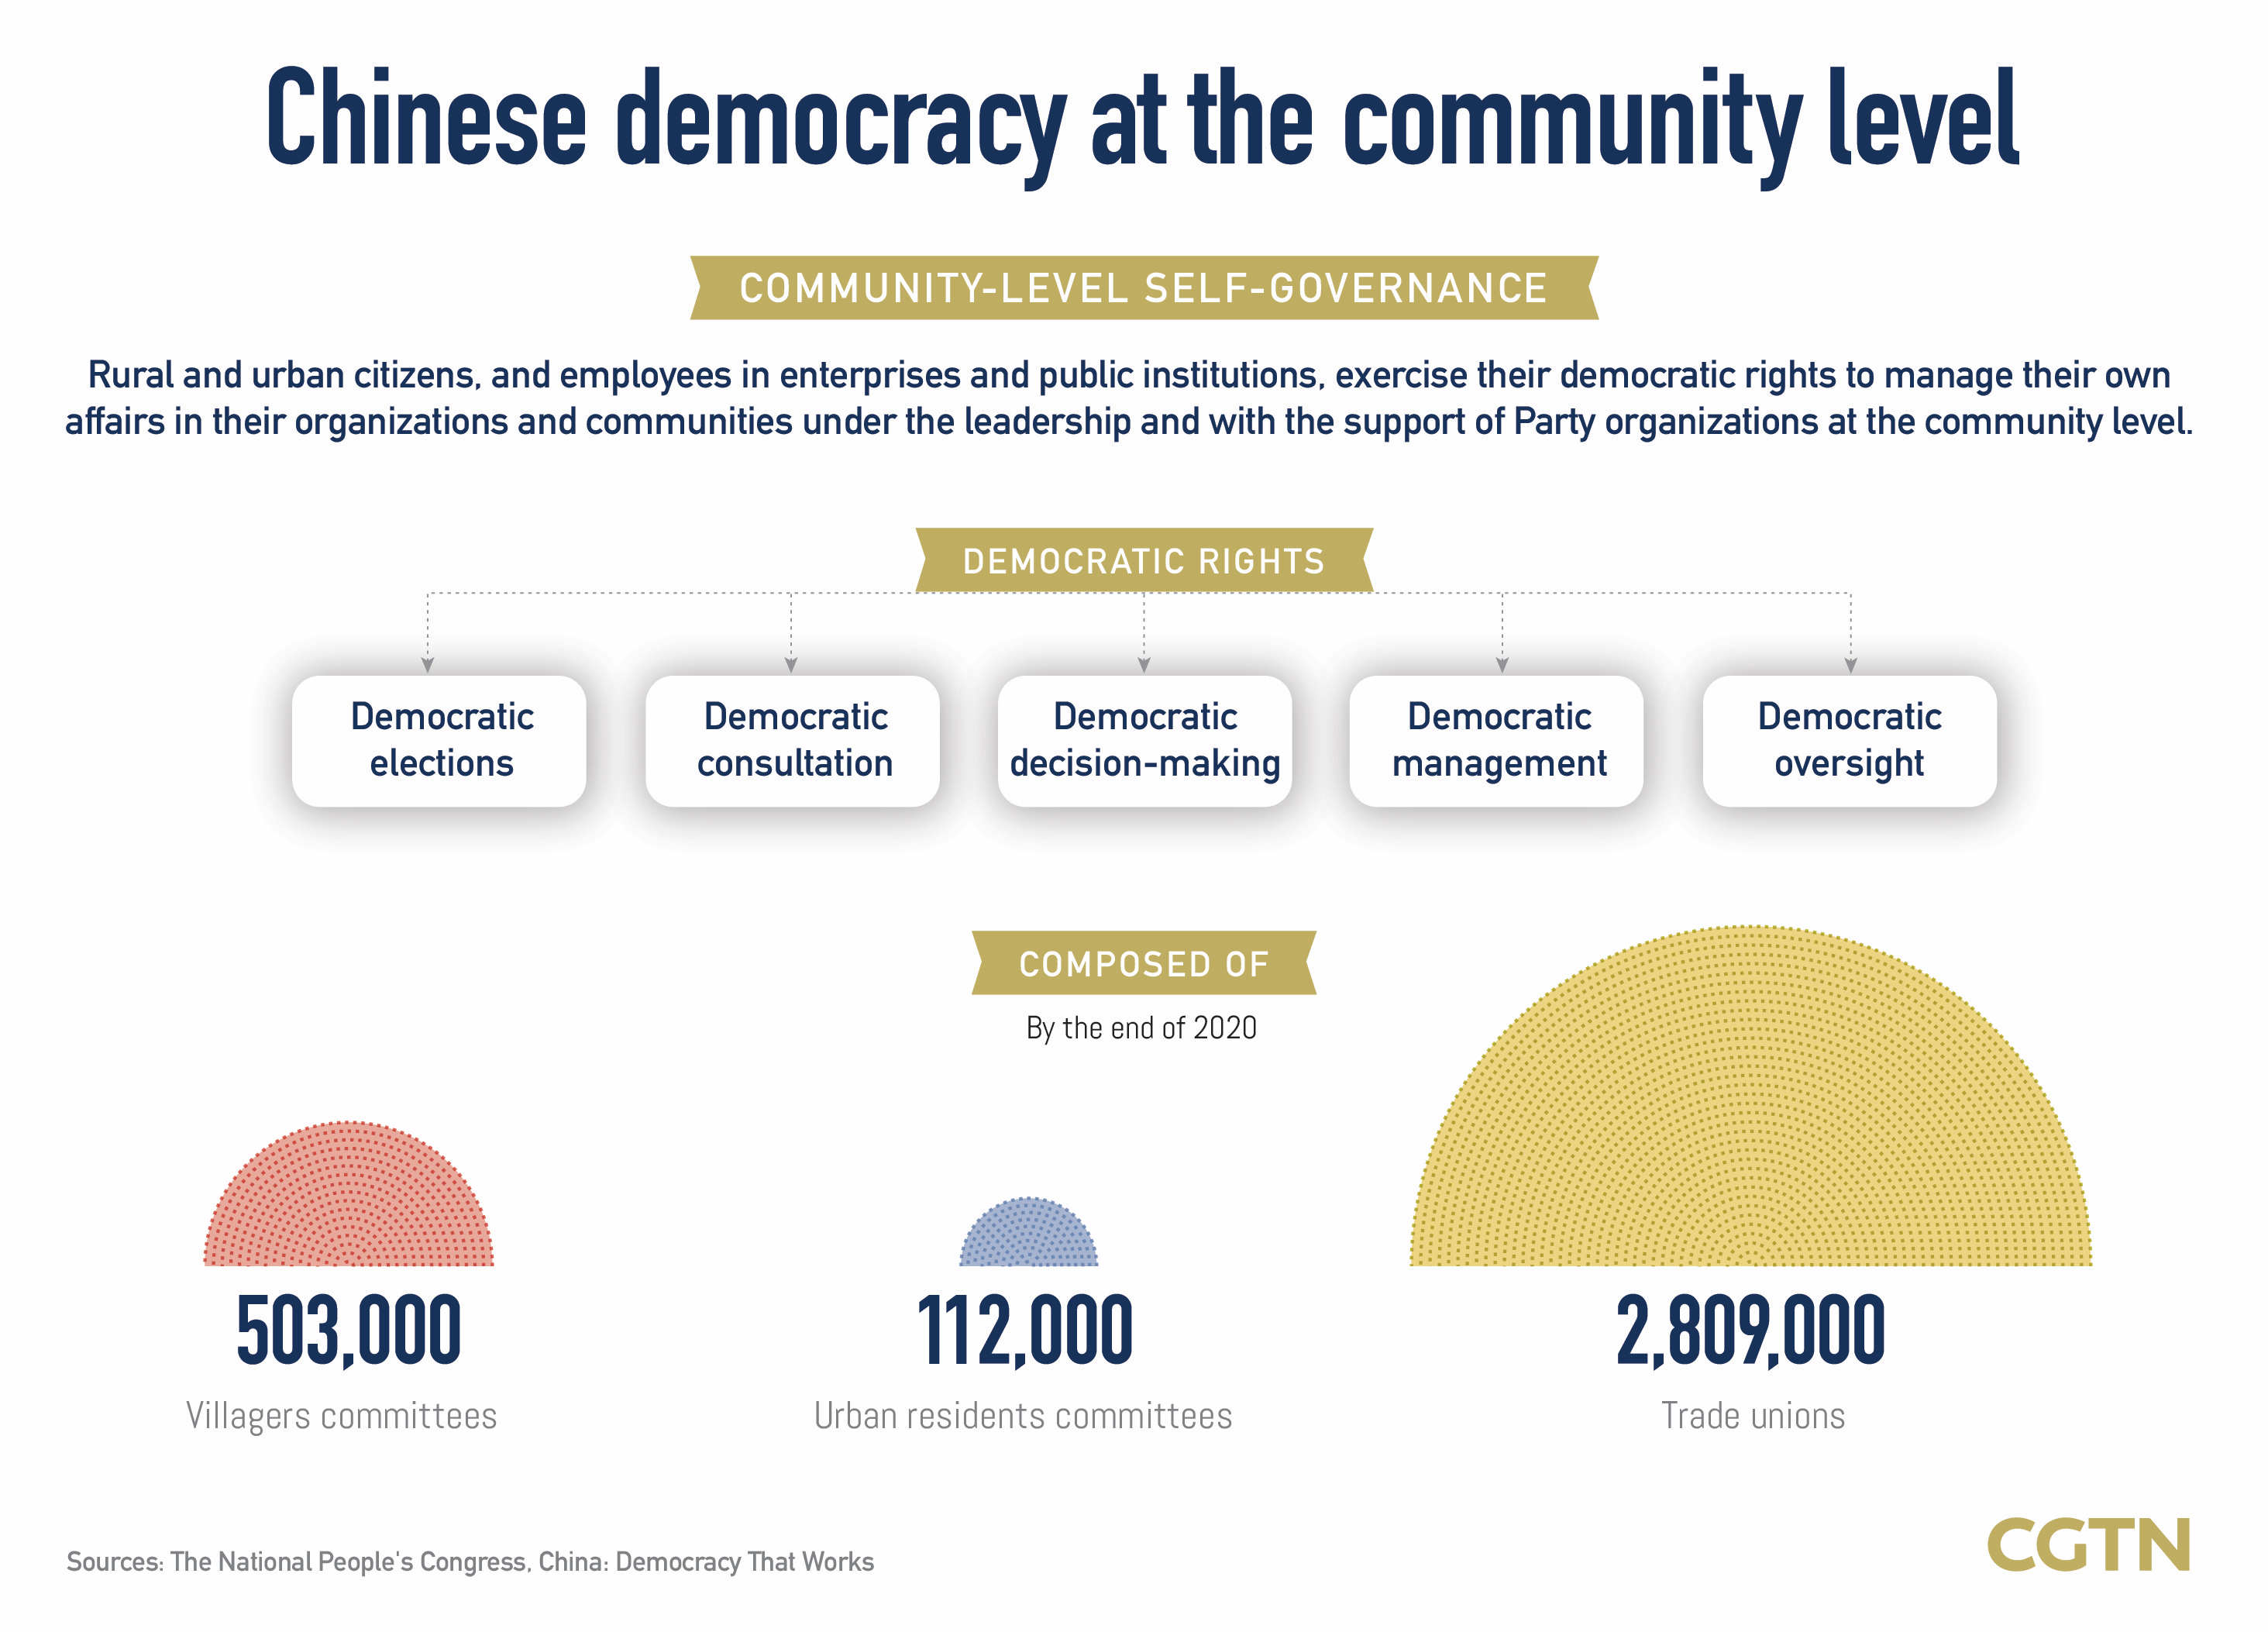 How China's democracy works at the grassroots level